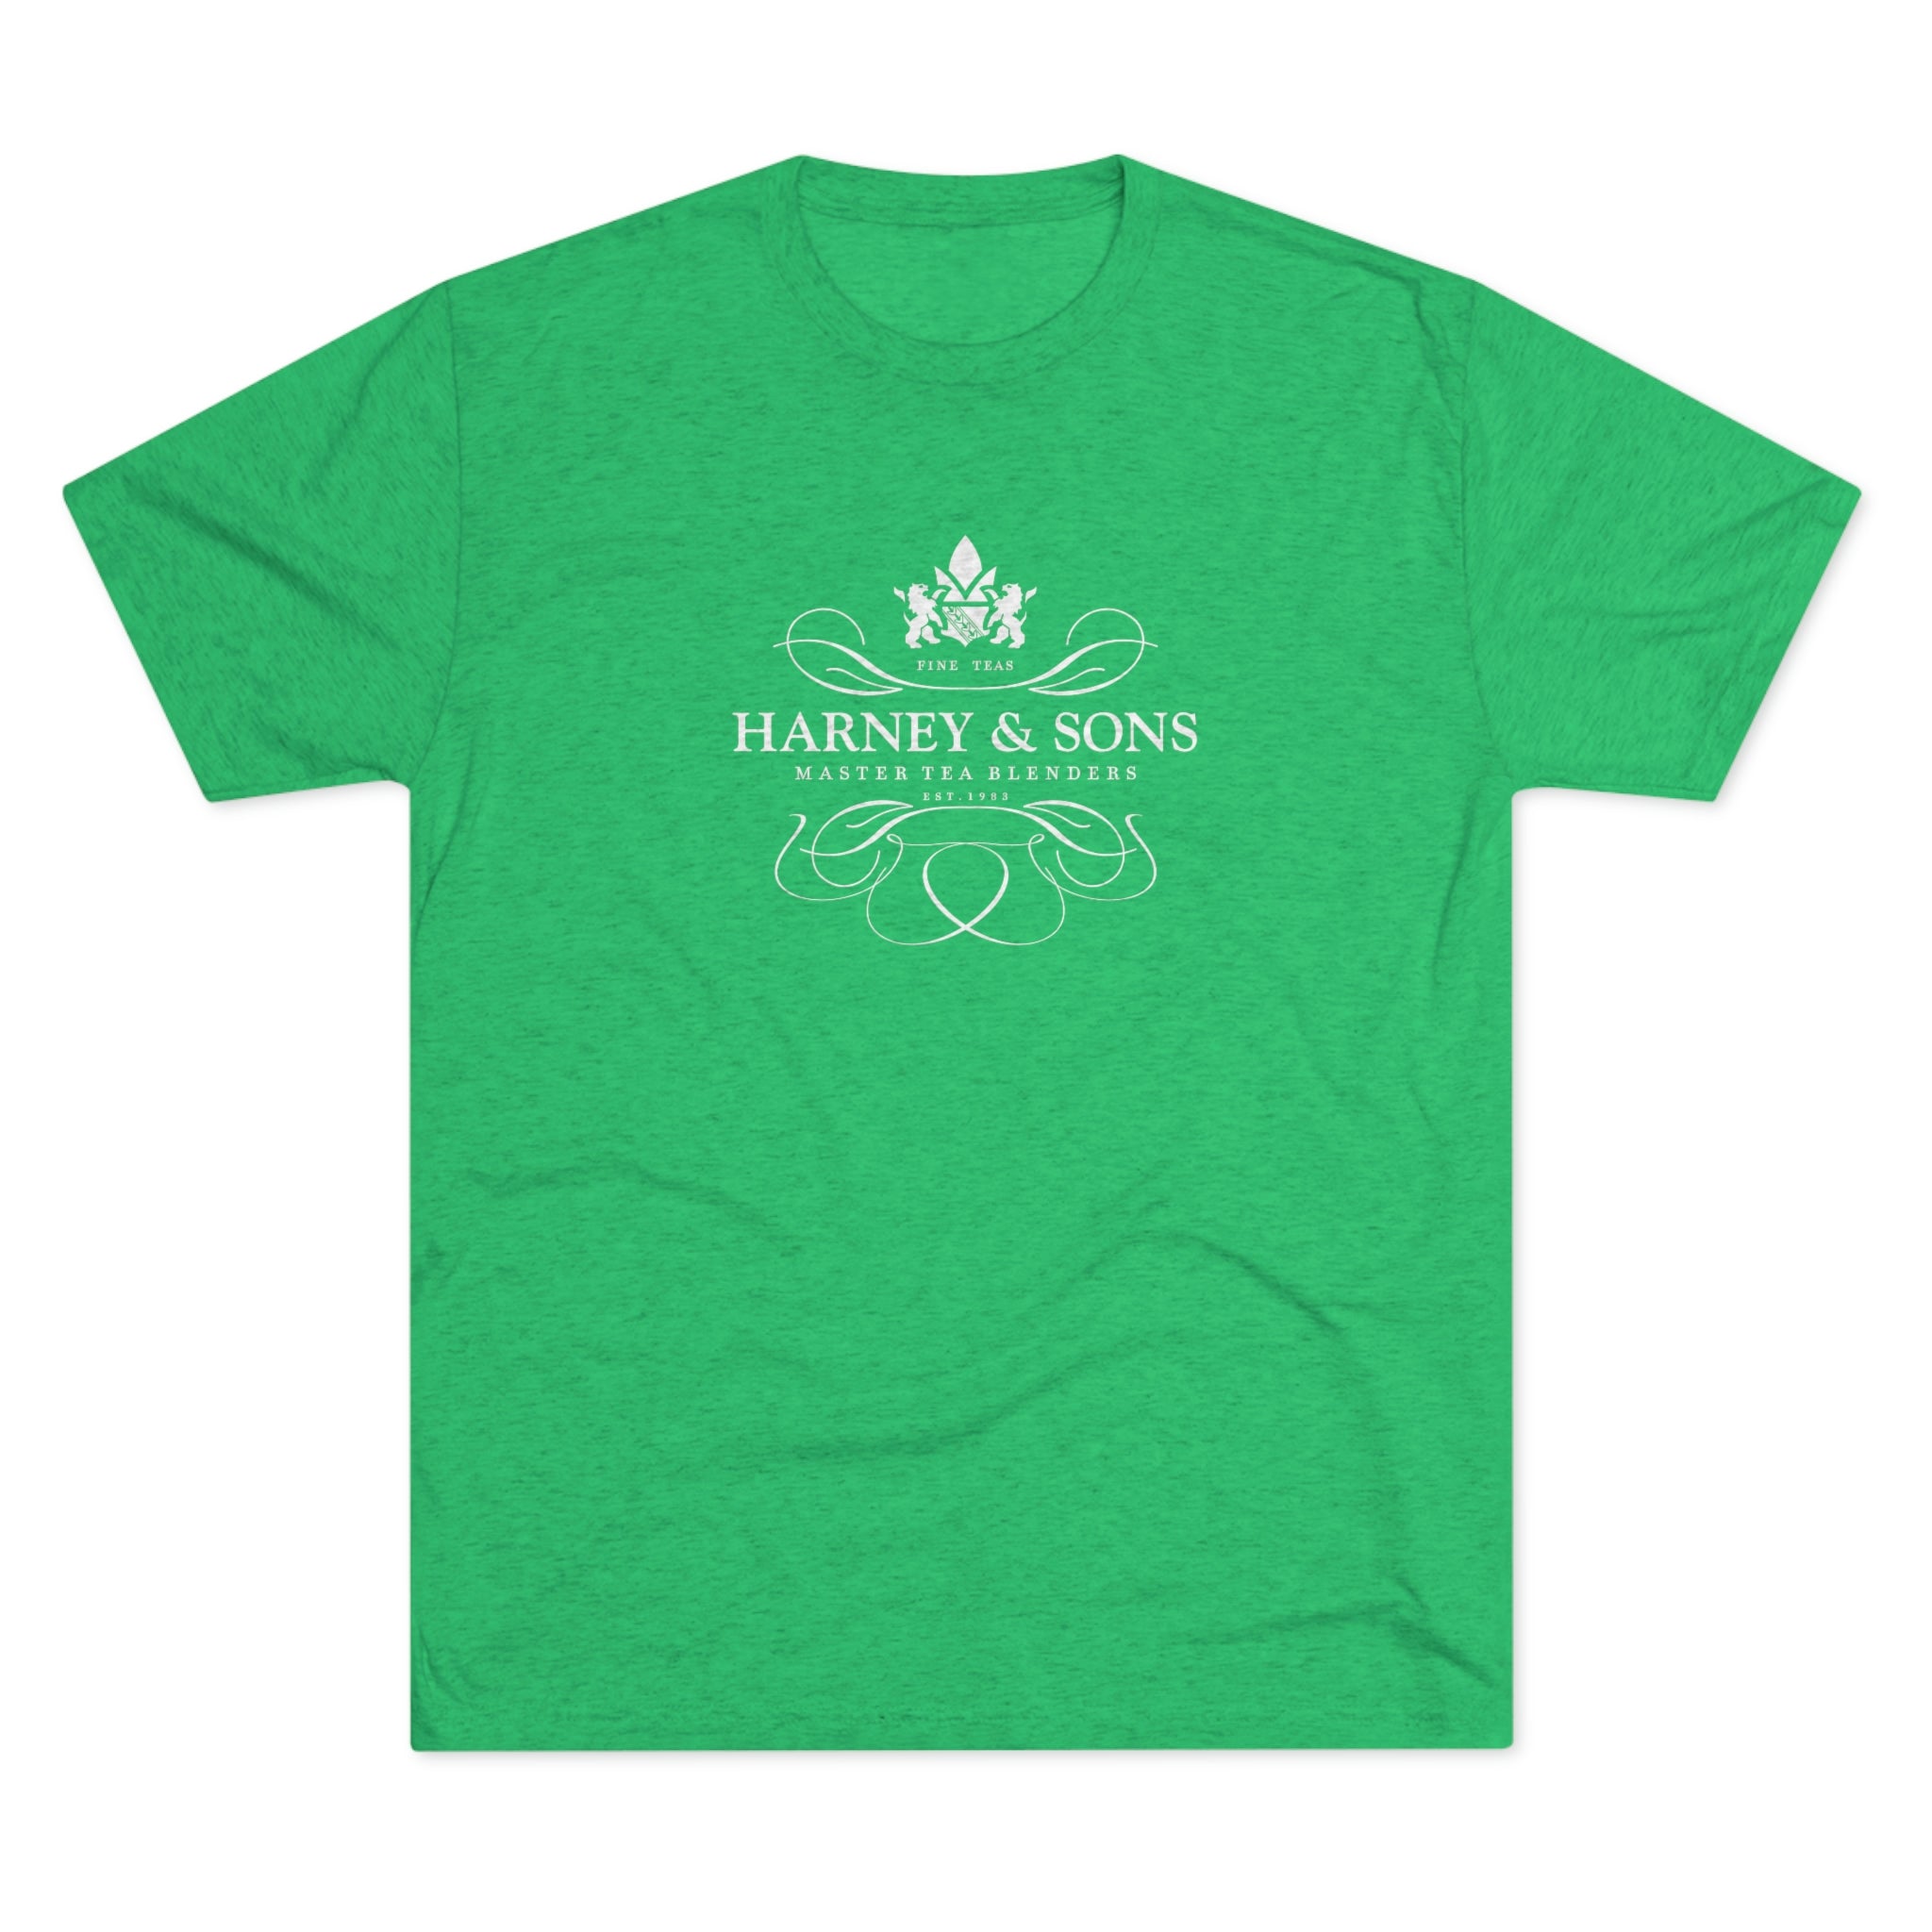 Harney & Sons Logo Graphic Tee - Tri-Blend Envy S - Harney & Sons Fine Teas